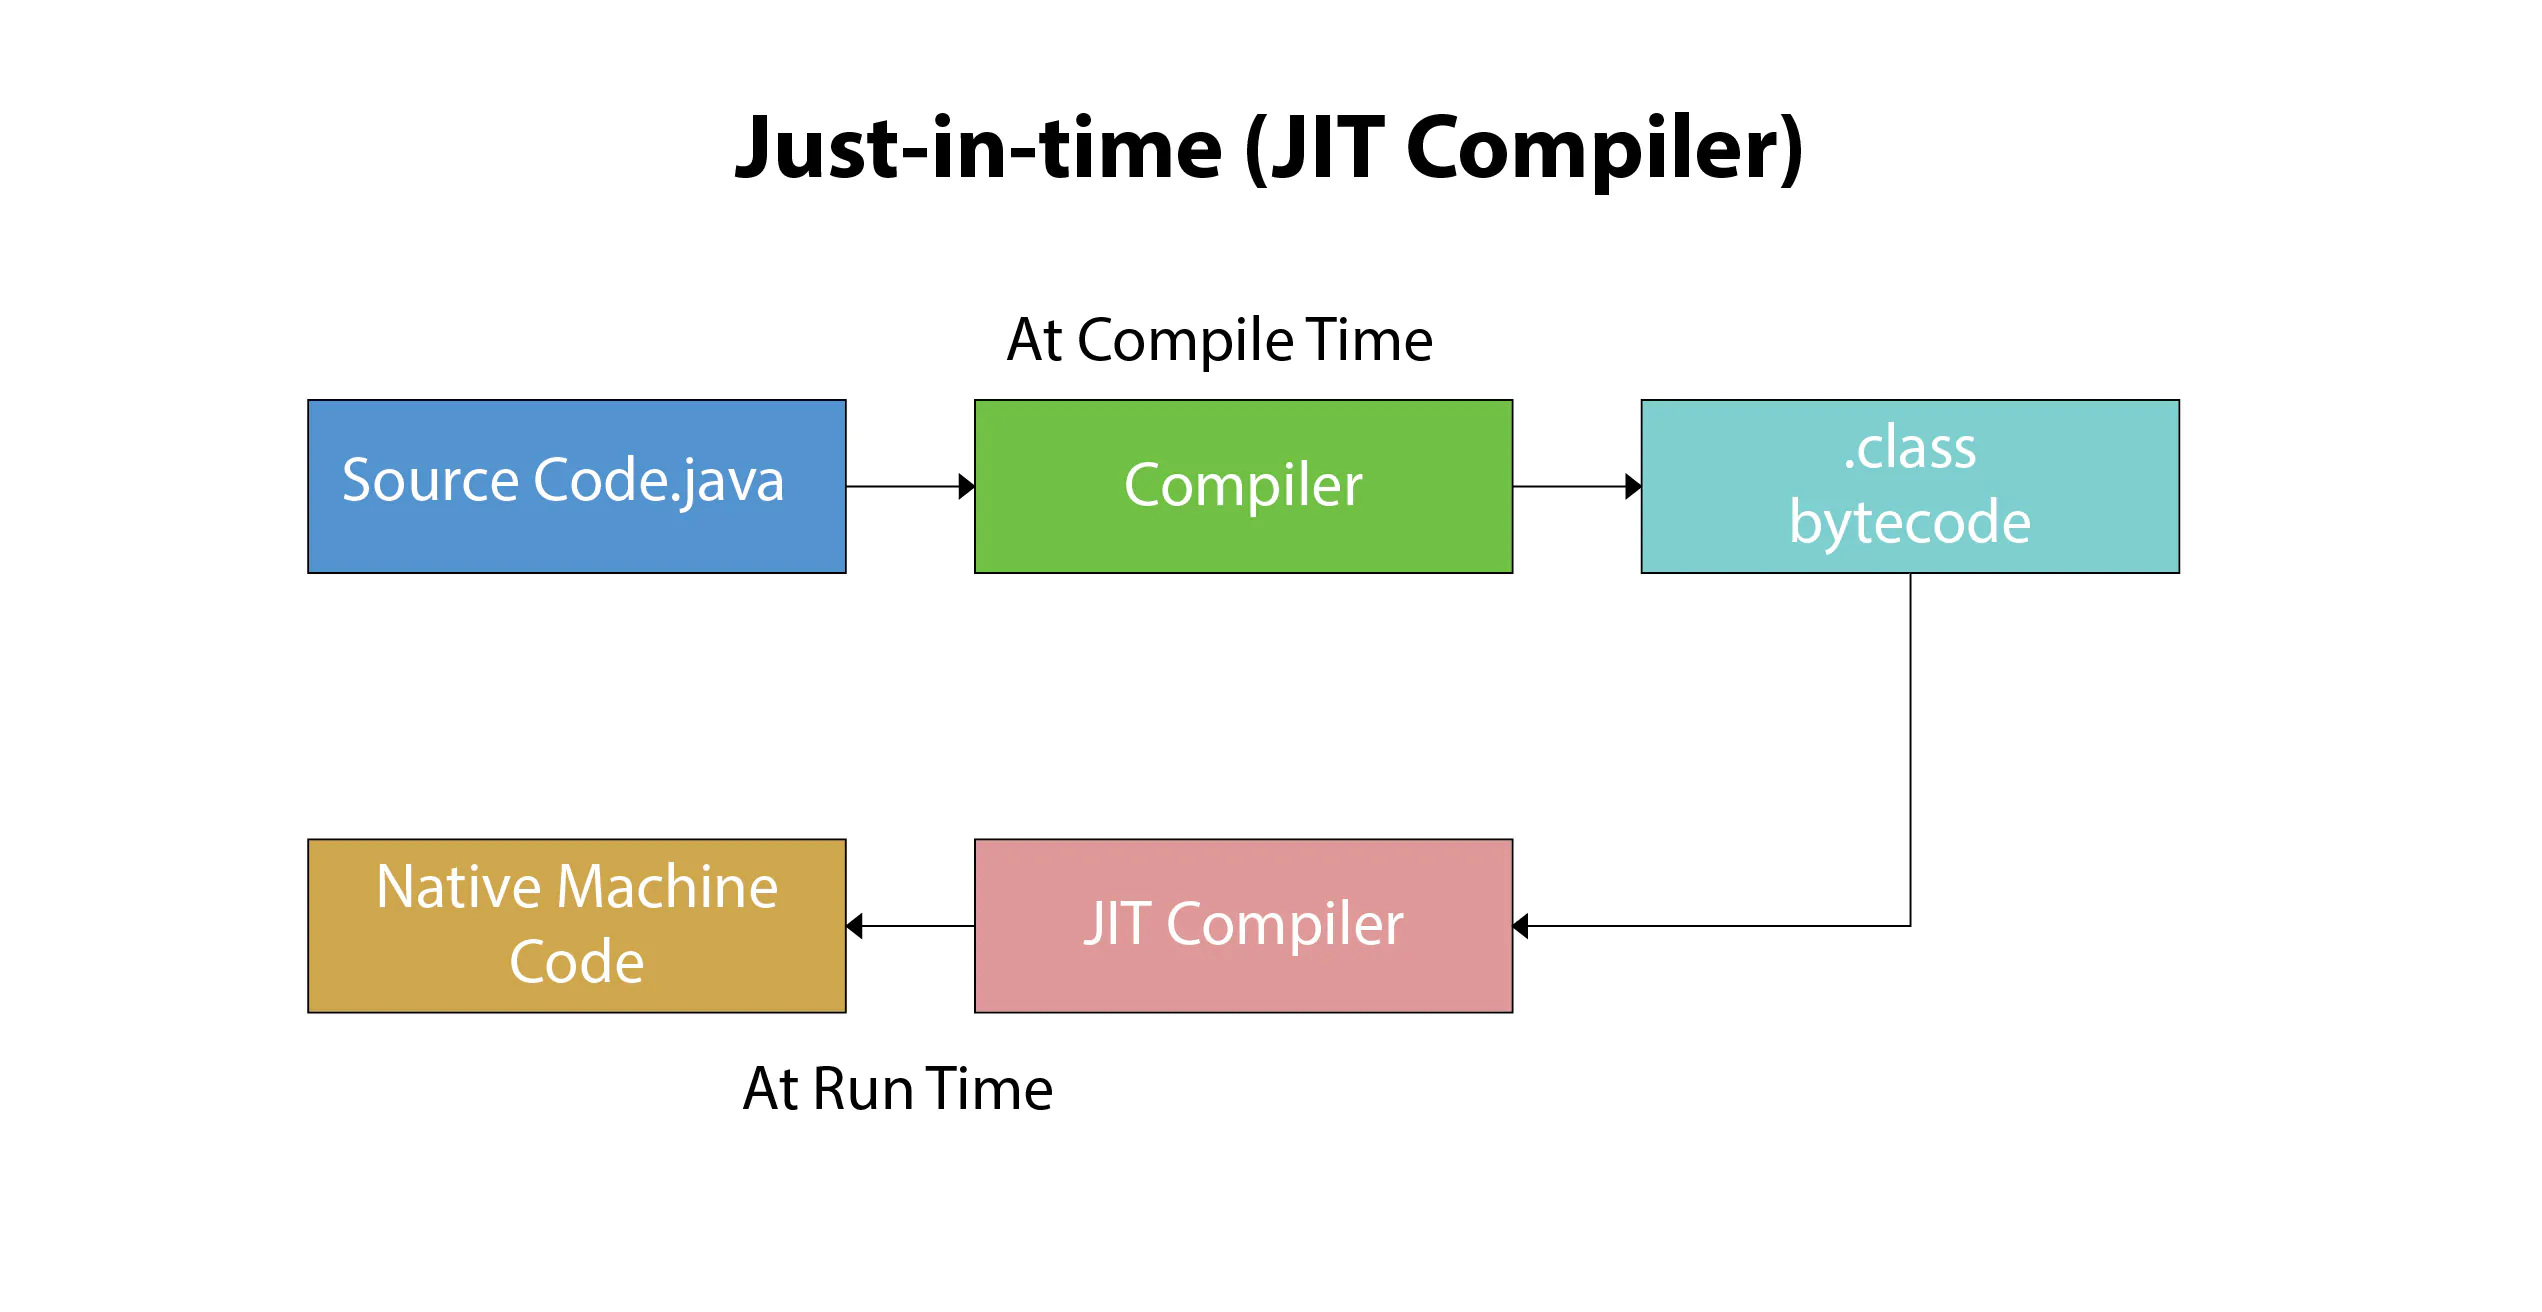 Just-in-time (JIT) Compiler work flow